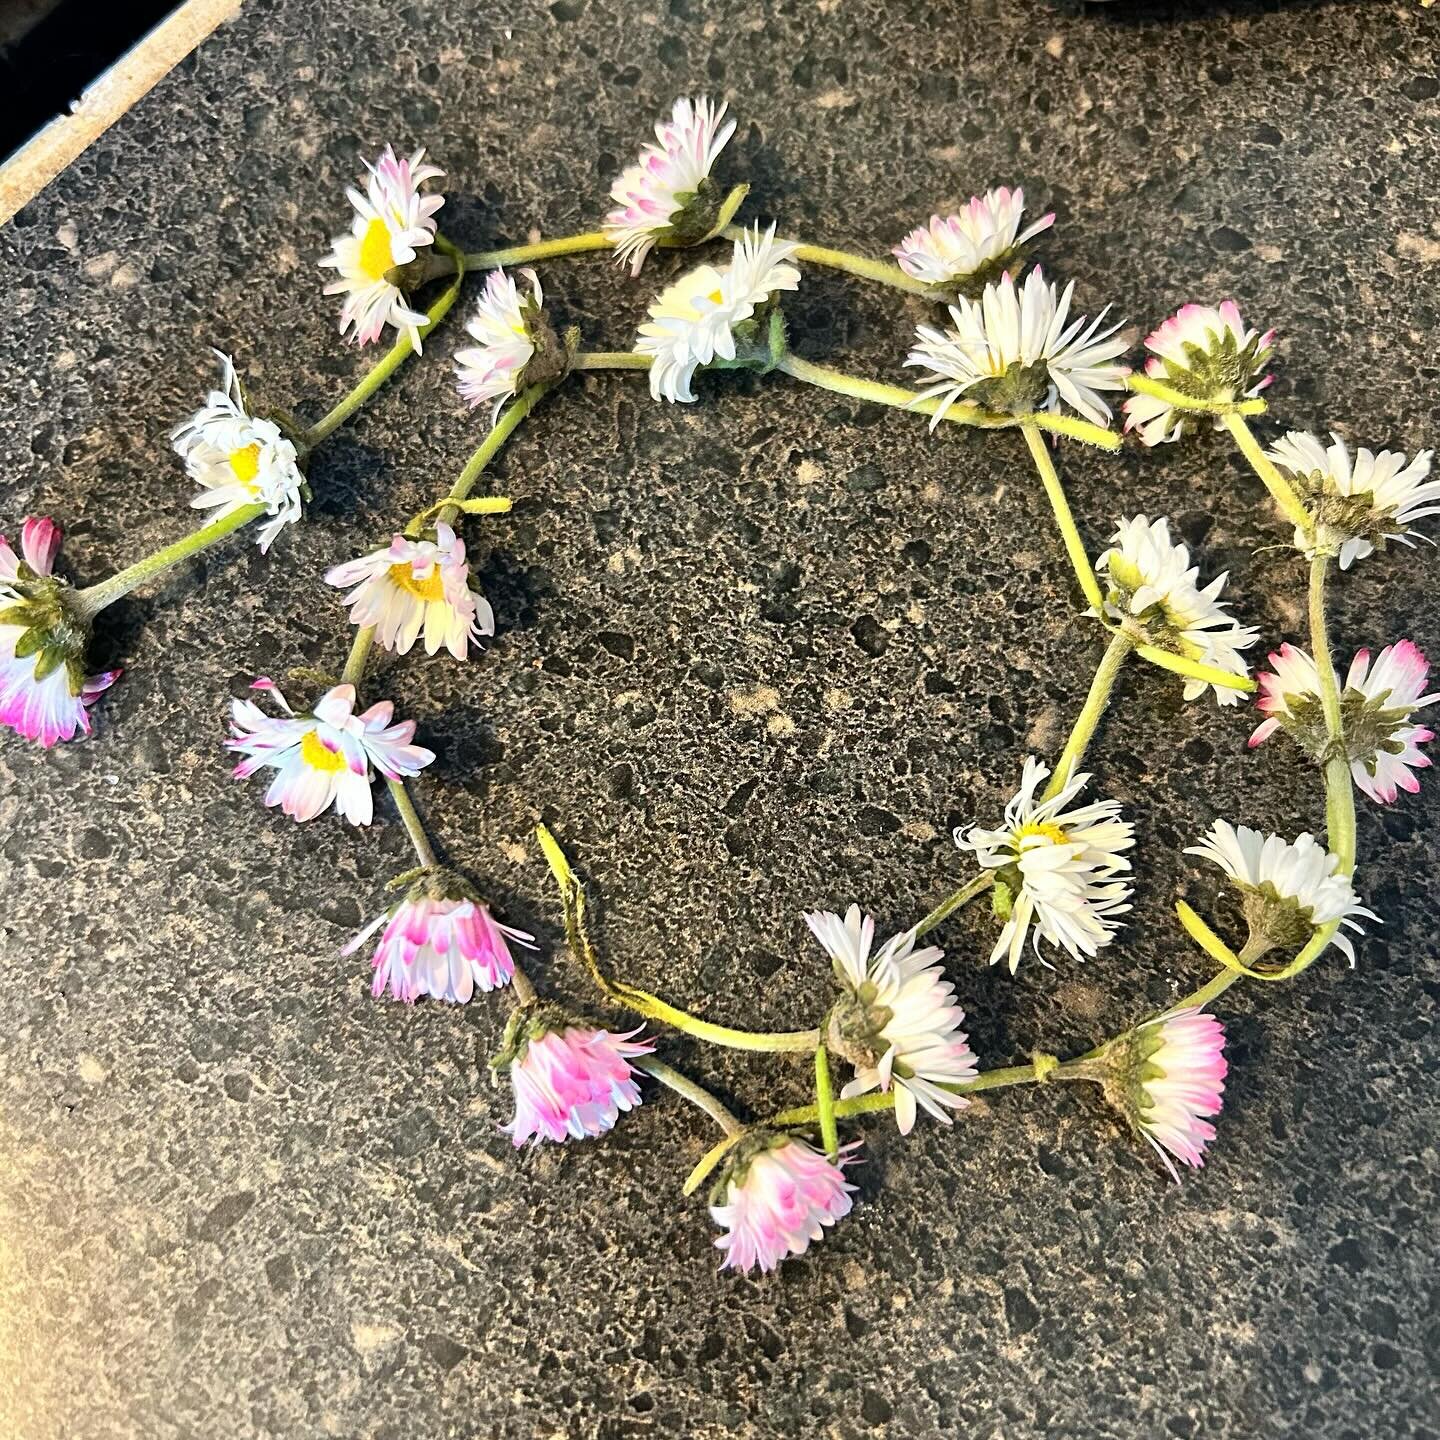 I was delighted to find this daisy chain on the counter yesterday on the eve of the equinox.

I found several trees in full bloom on my walk.

Today we are officially in Spring.

There are new fabrics for the eye and neck pillows in the Here &middot;